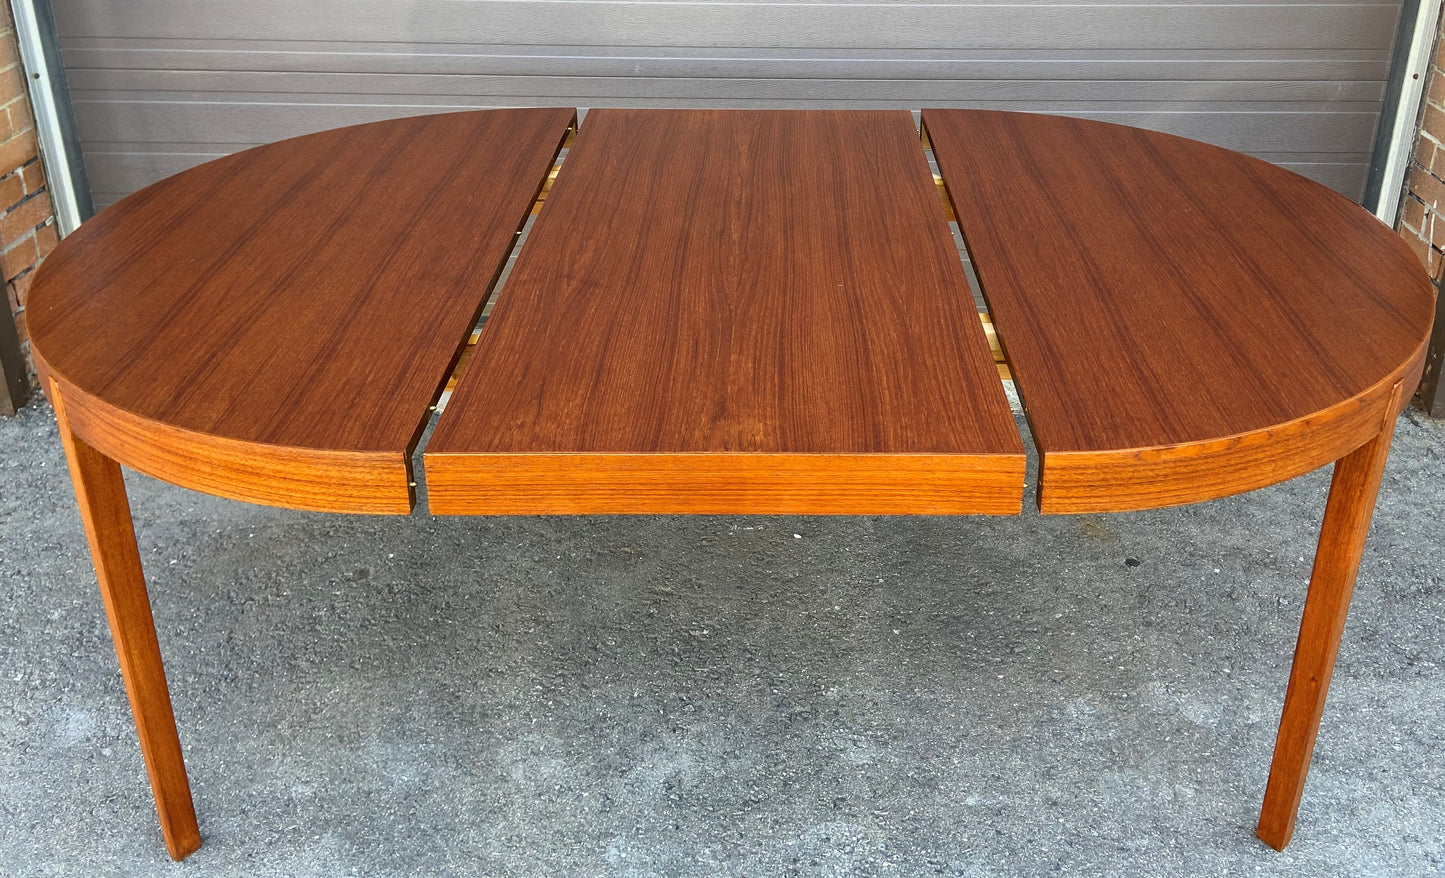 REFINISHED Danish Mid Century Modern Teak Table 47"-71" Round to Oval by N. Koefoed